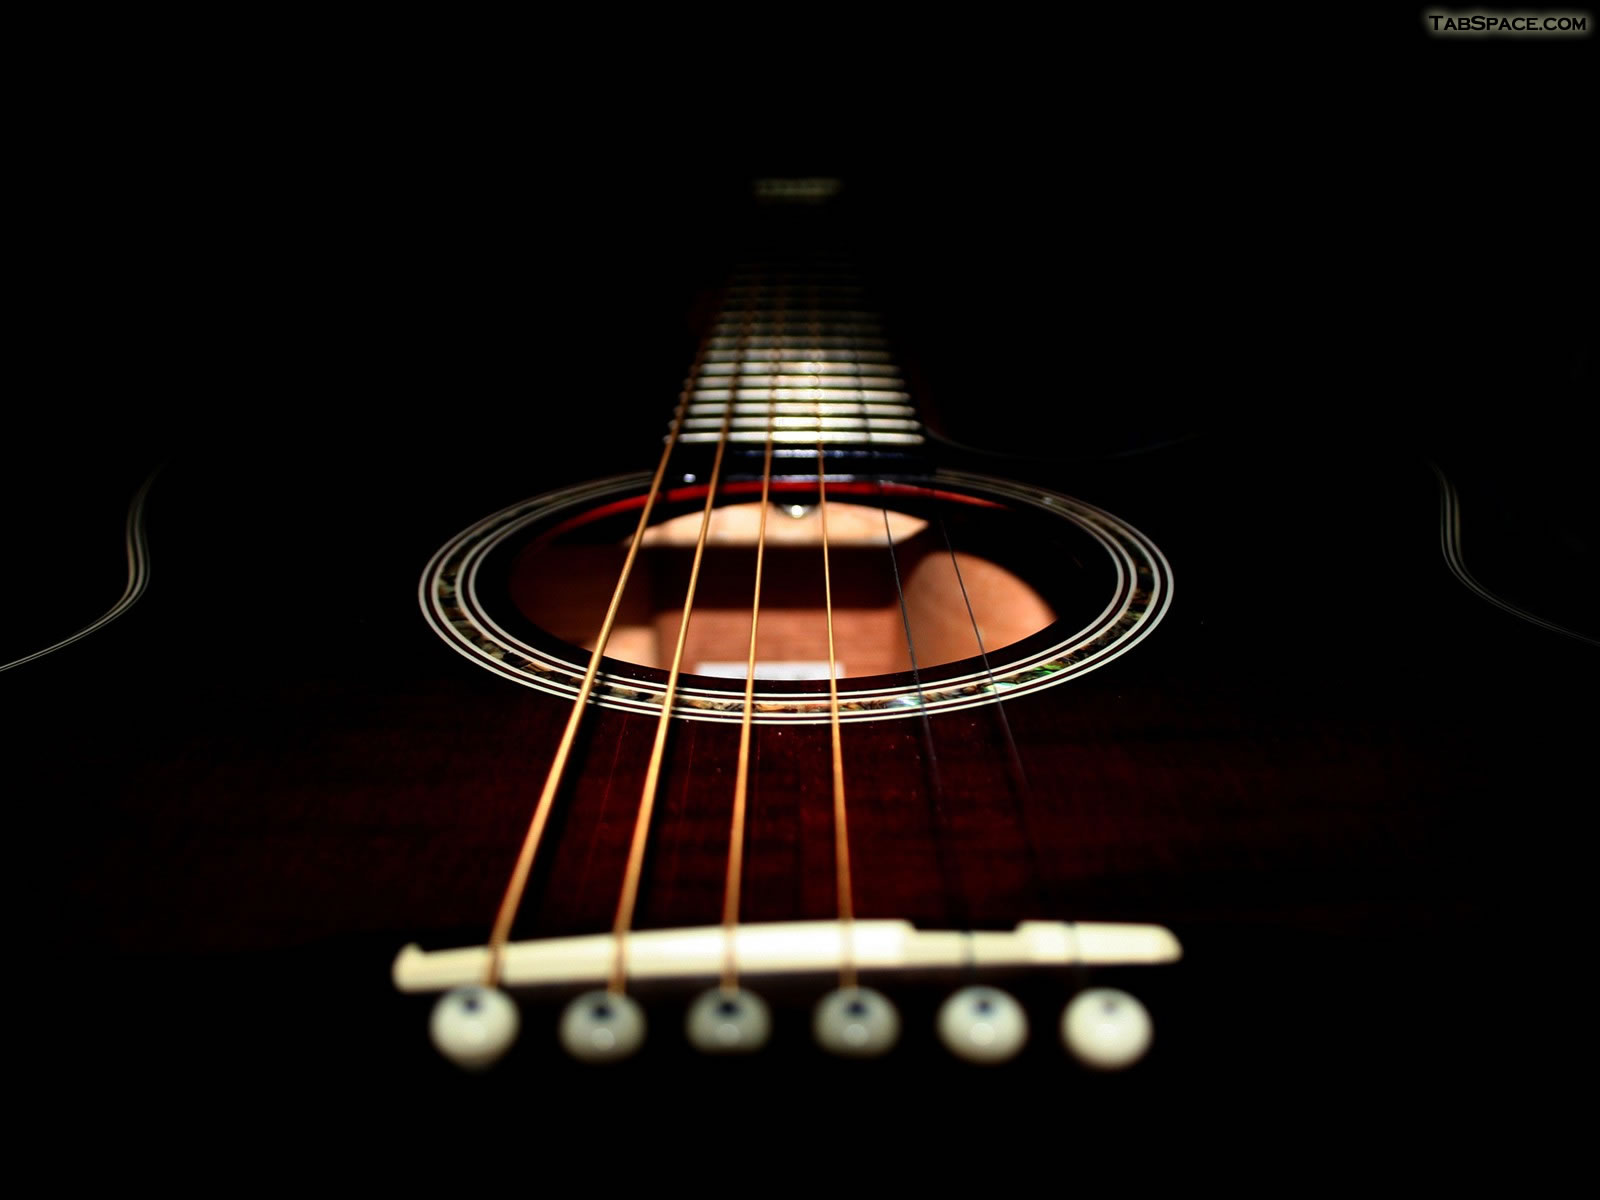 HD Acoustic Guitar Wallpaper For Desktop High Definition And